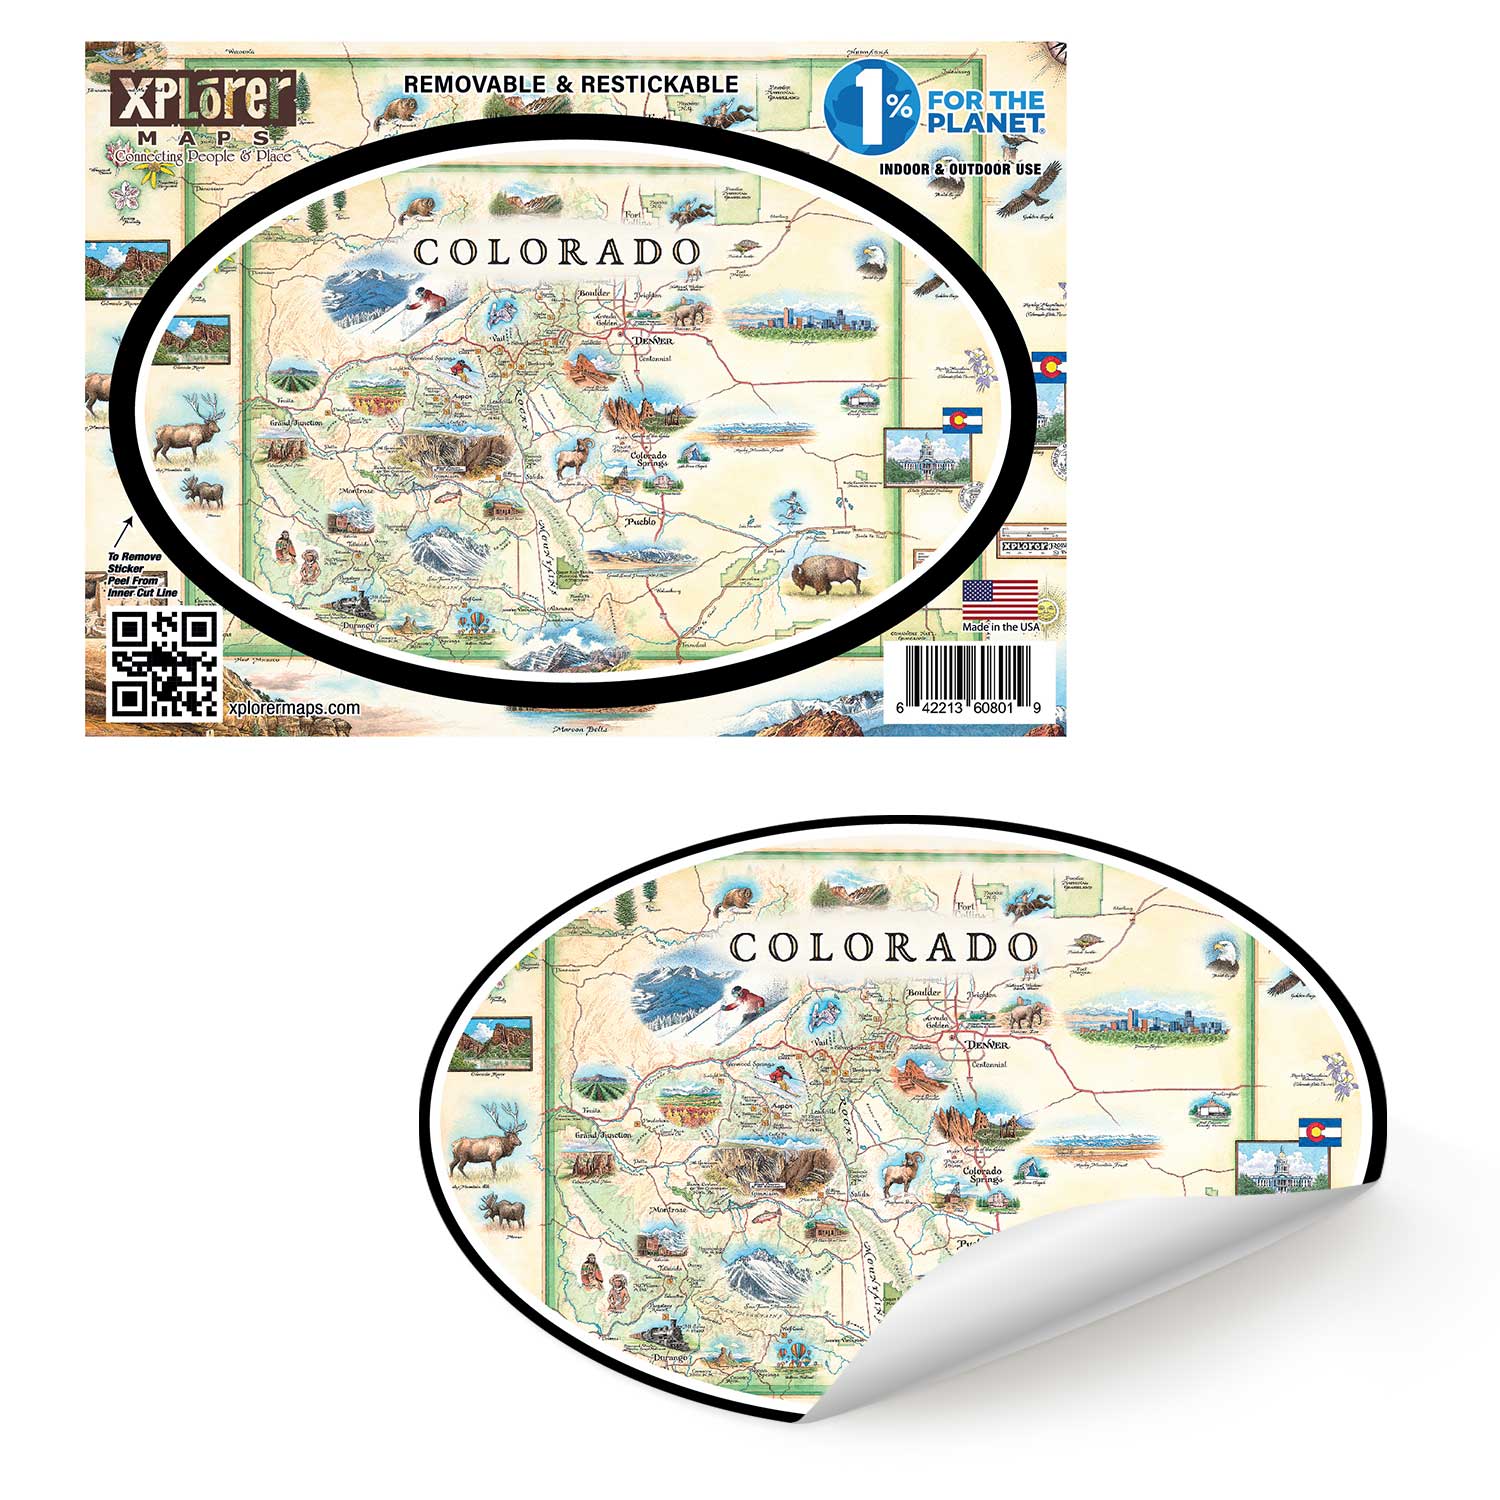 Colorado State Map Sticker by Xplorer Maps showcases various cities including Denver, Fort Collins, Colorado Springs, Aspen, and Durango. It also features local flora and fauna, such as moose, Rocky Mountain elk, turtles, eagles, and Bighorn Sheep, as well as the indigenous Navajo and Hopi peoples. The map highlights popular activities like hiking, biking, rafting, and skiing. 